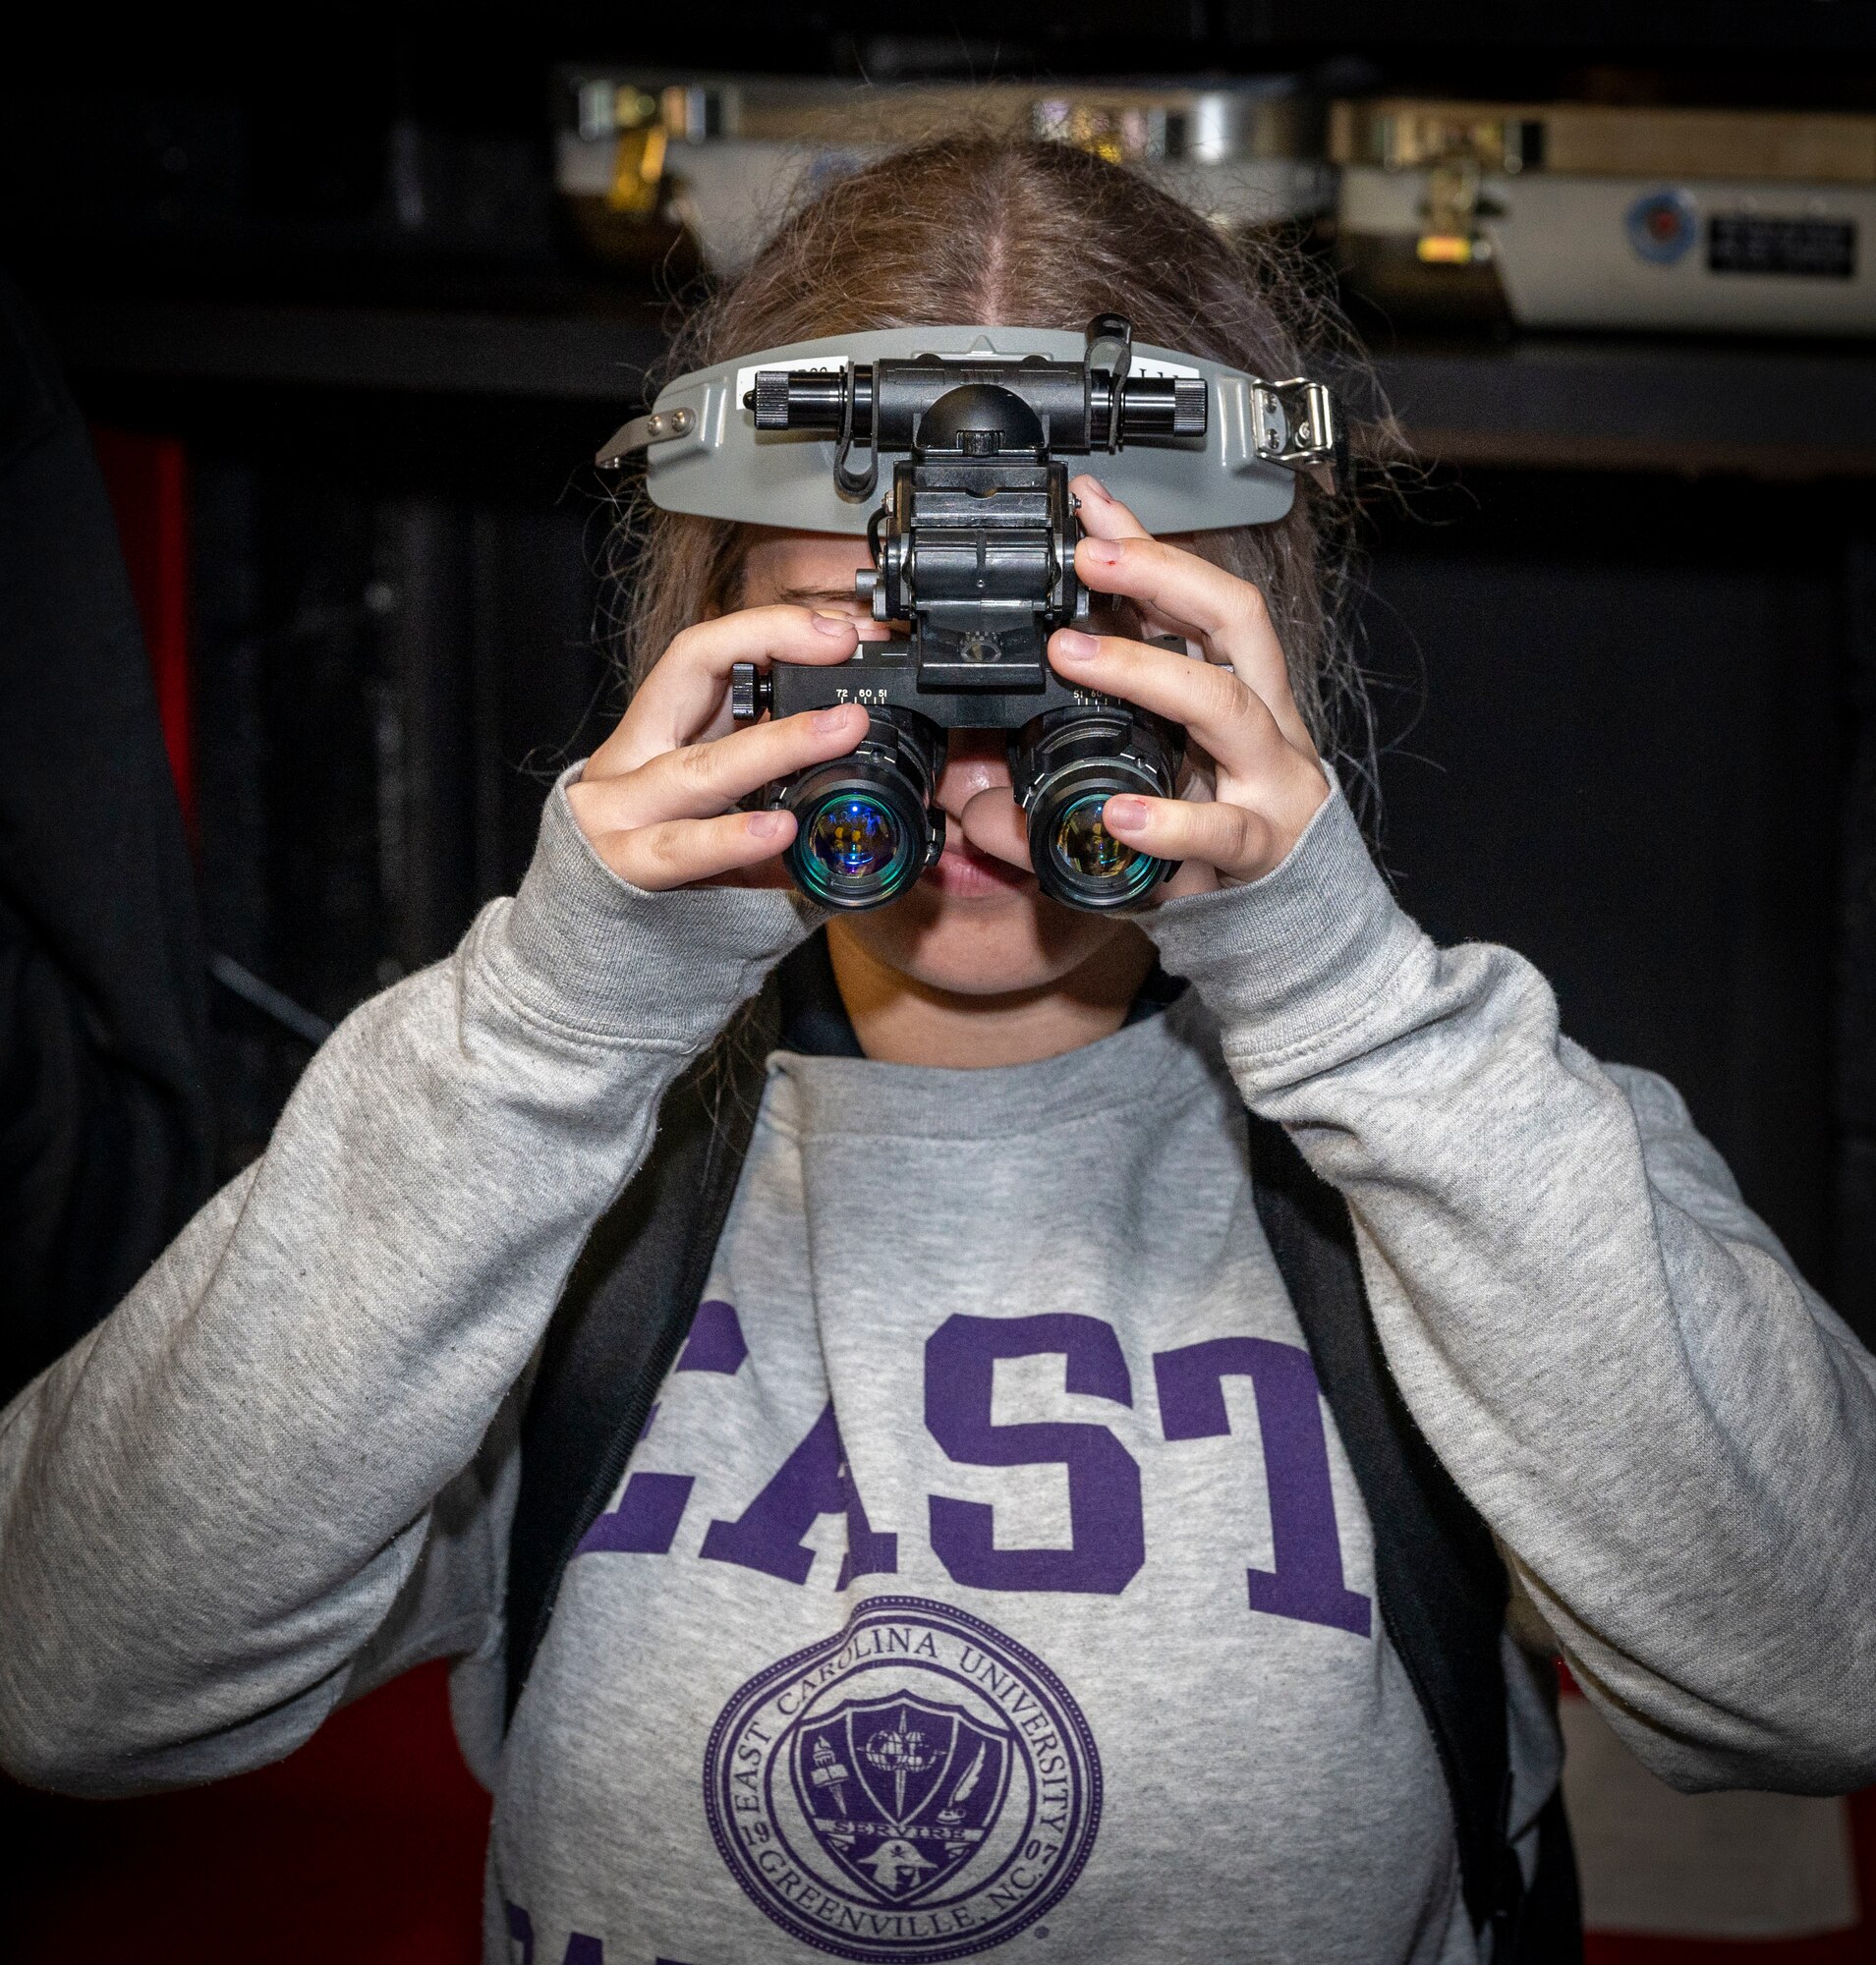 Annie Foery, East Carolina University Air Force ROTC cadet, learns about night vision gear used by the 333rd Fighter Generation Squadron during the Strive 4th: A project Tuskegee and AIM Initiative, at Seymour Johnson Air Force Base, North Carolina, Nov. 4, 2022.